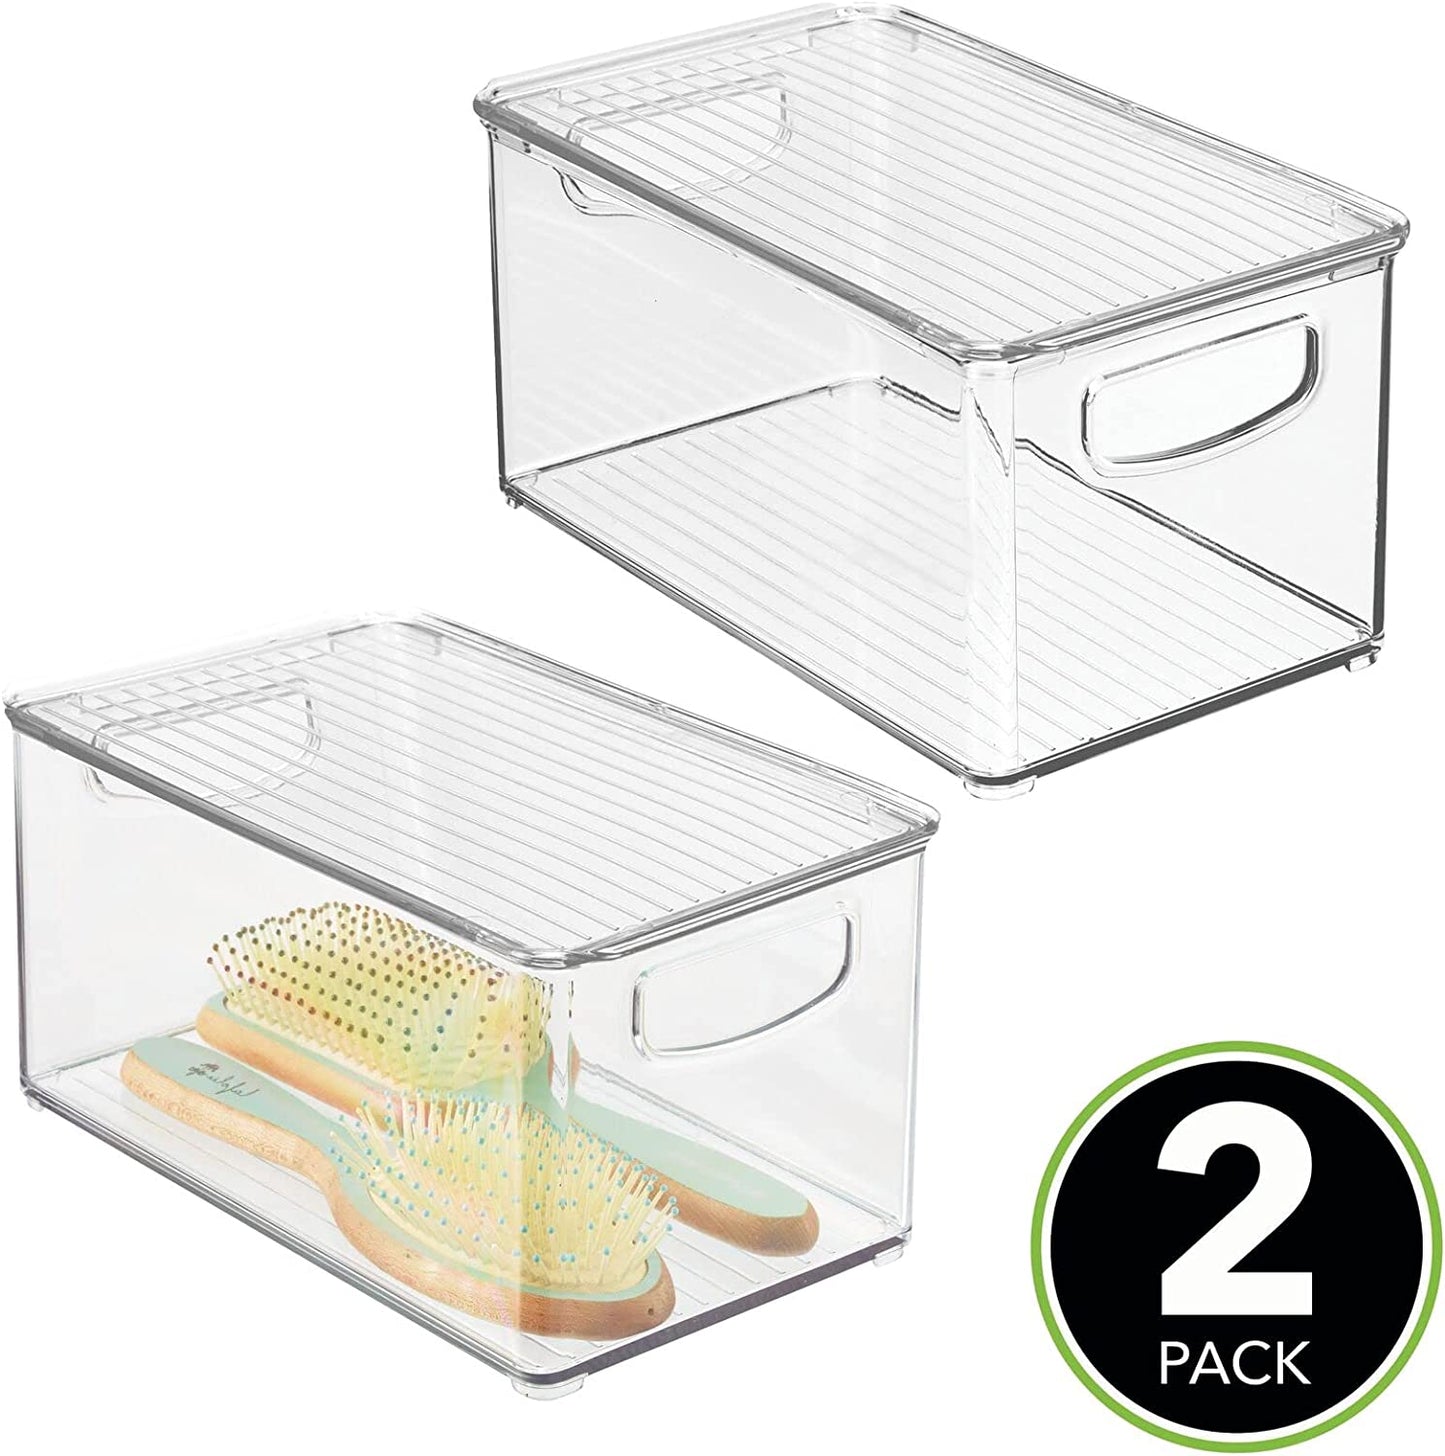 mDesign Deep Plastic Bathroom Storage Bin Box, Lid/Built-in Handles, Organization for Makeup, Hair Styling Tools, Toiletry Accessories in Cabinet, Shelves, Ligne Collection, 2 Pack, Clear/Clear